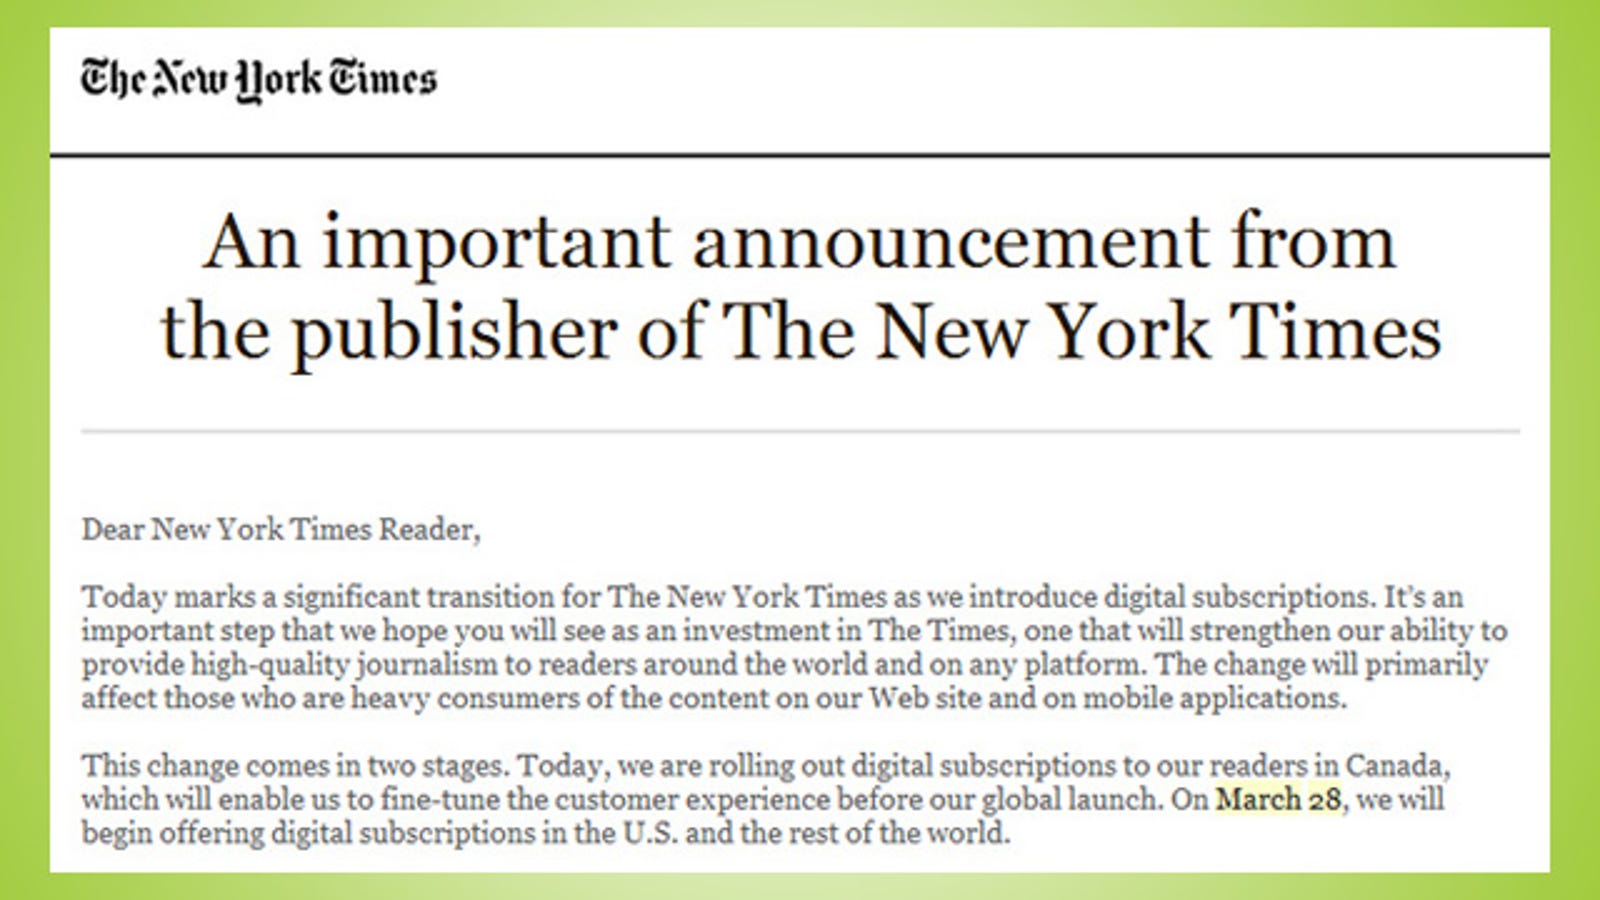 How to Work Around the New York Times #39 20 Article per Month Paywall